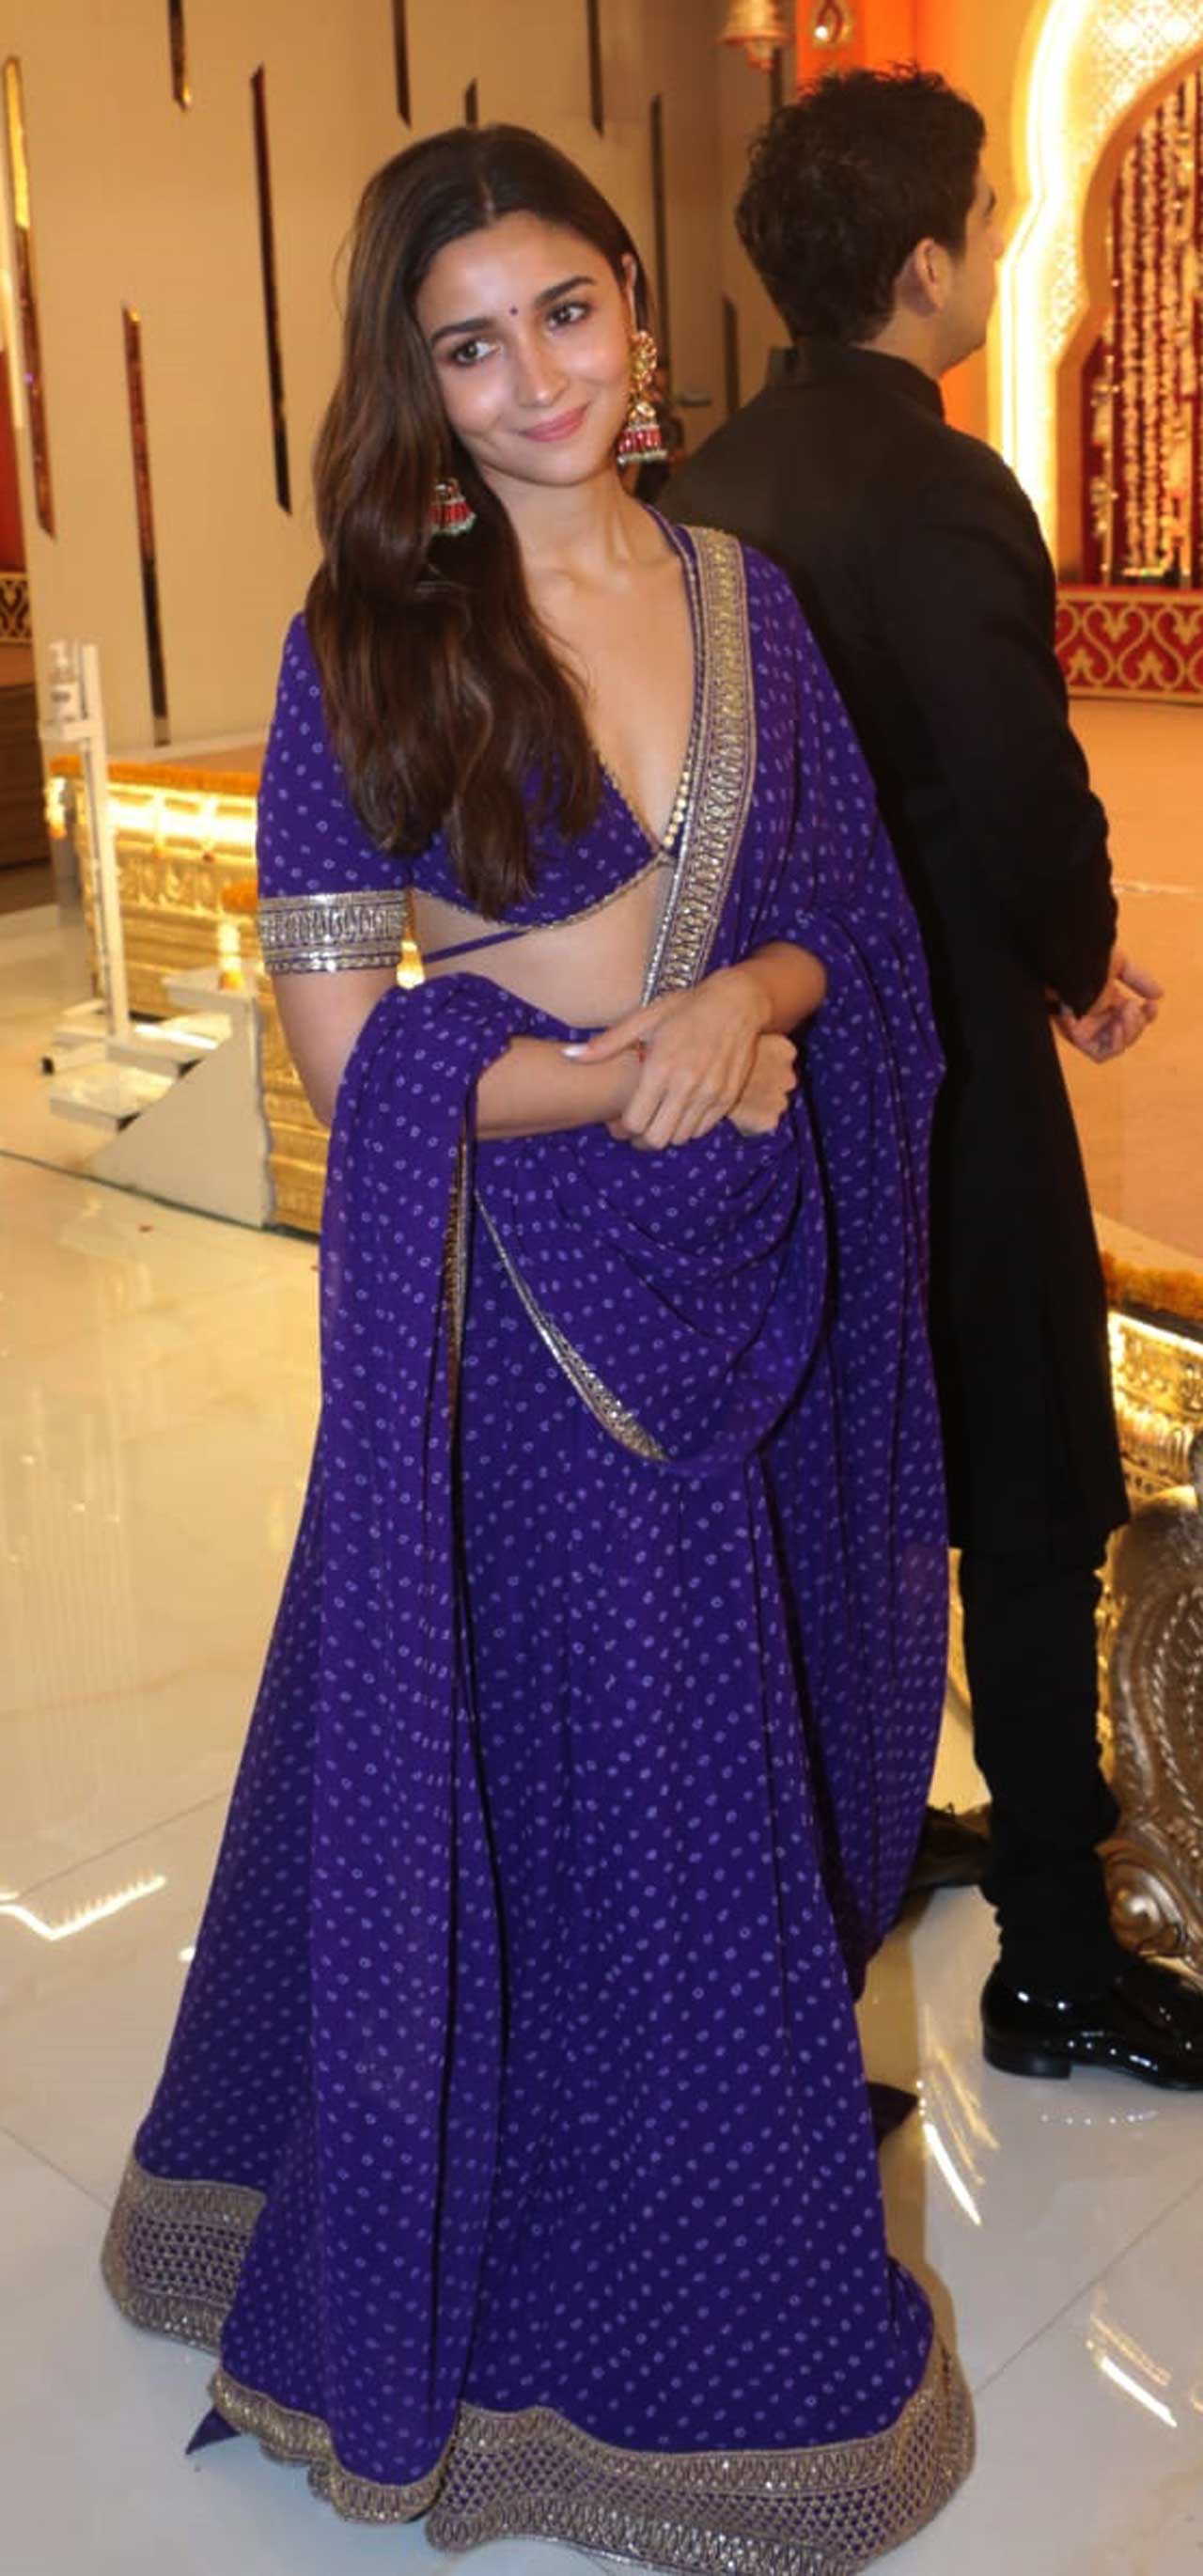 Alia Bhatt was the cynosure of all eyes as she stepped out with Ranbir Kapoor and Ayan Mukerji to attend Lakshmi Puja in the city. The actress wore a printed purple Sabyasachi lehenga set, that had a plunging neckline on a half sleeve, backless blouse adorned with polka print and tied with a dori behind. Gold embroidery on sleeves and an embellished hemline, a matching printed dupatta with patti embroidery completed the outfit. Pink and gold colour jhumkis, a matching bindi for accessories, minimal make-up with a blush pink lip colour, sleek eyeliner, and blushed cheeks completed her look.